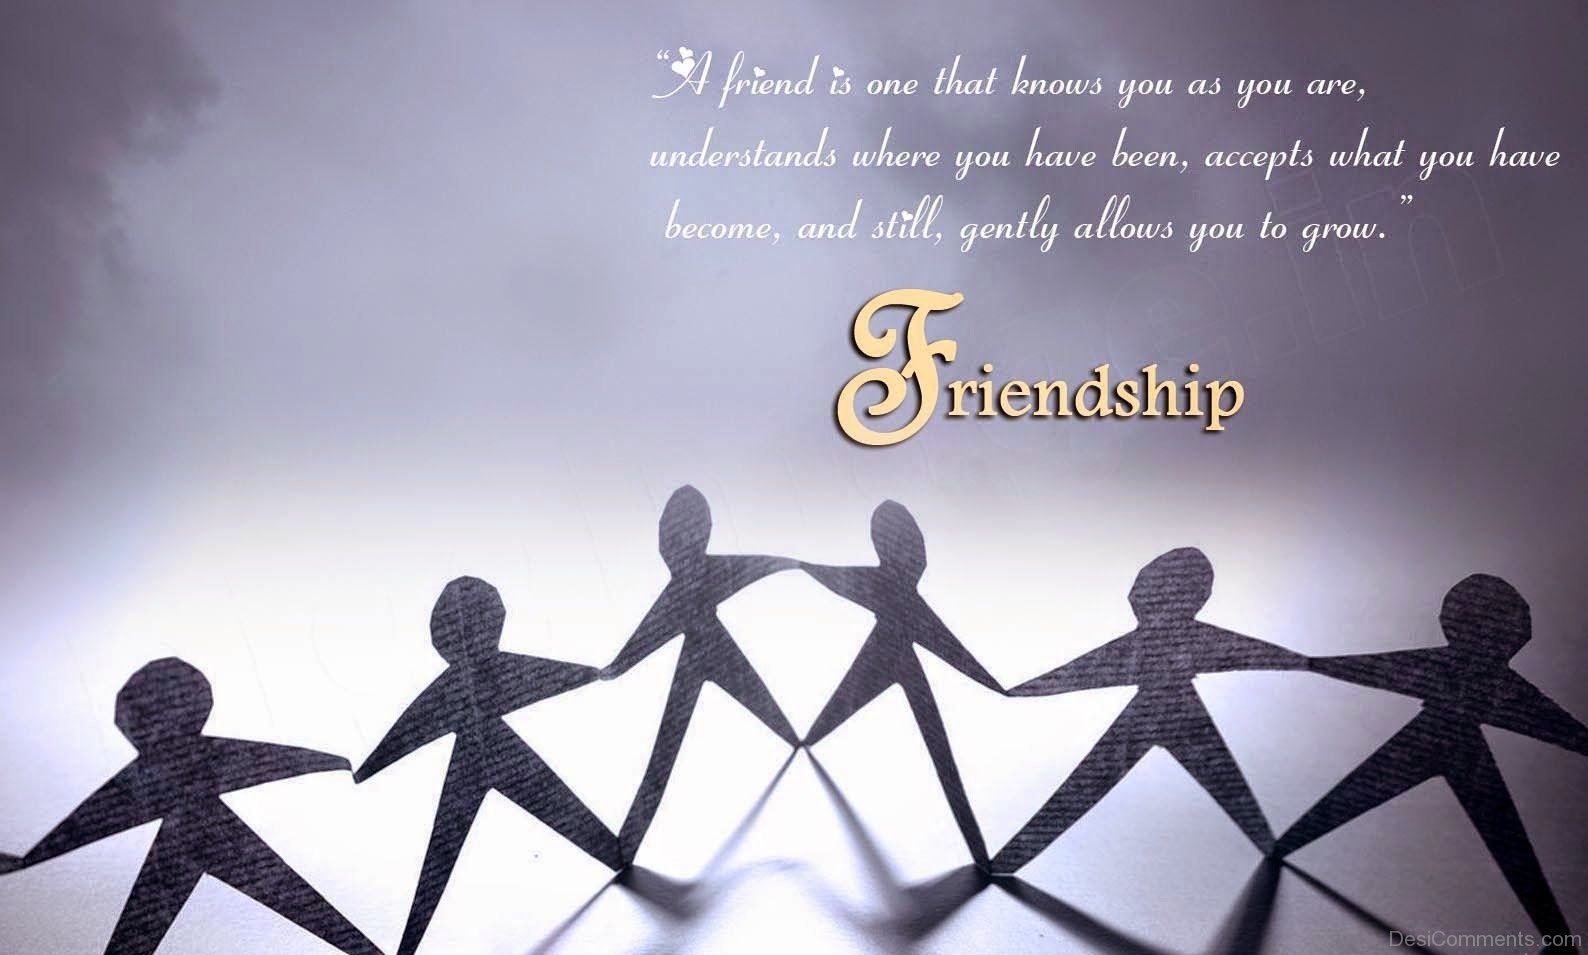 A Friend Is One That Knows You As You Are, Understands Where You Have Been, Accepts What You Have Become, And Still, Gently Allows You To Grow. Friendship Day Wishes